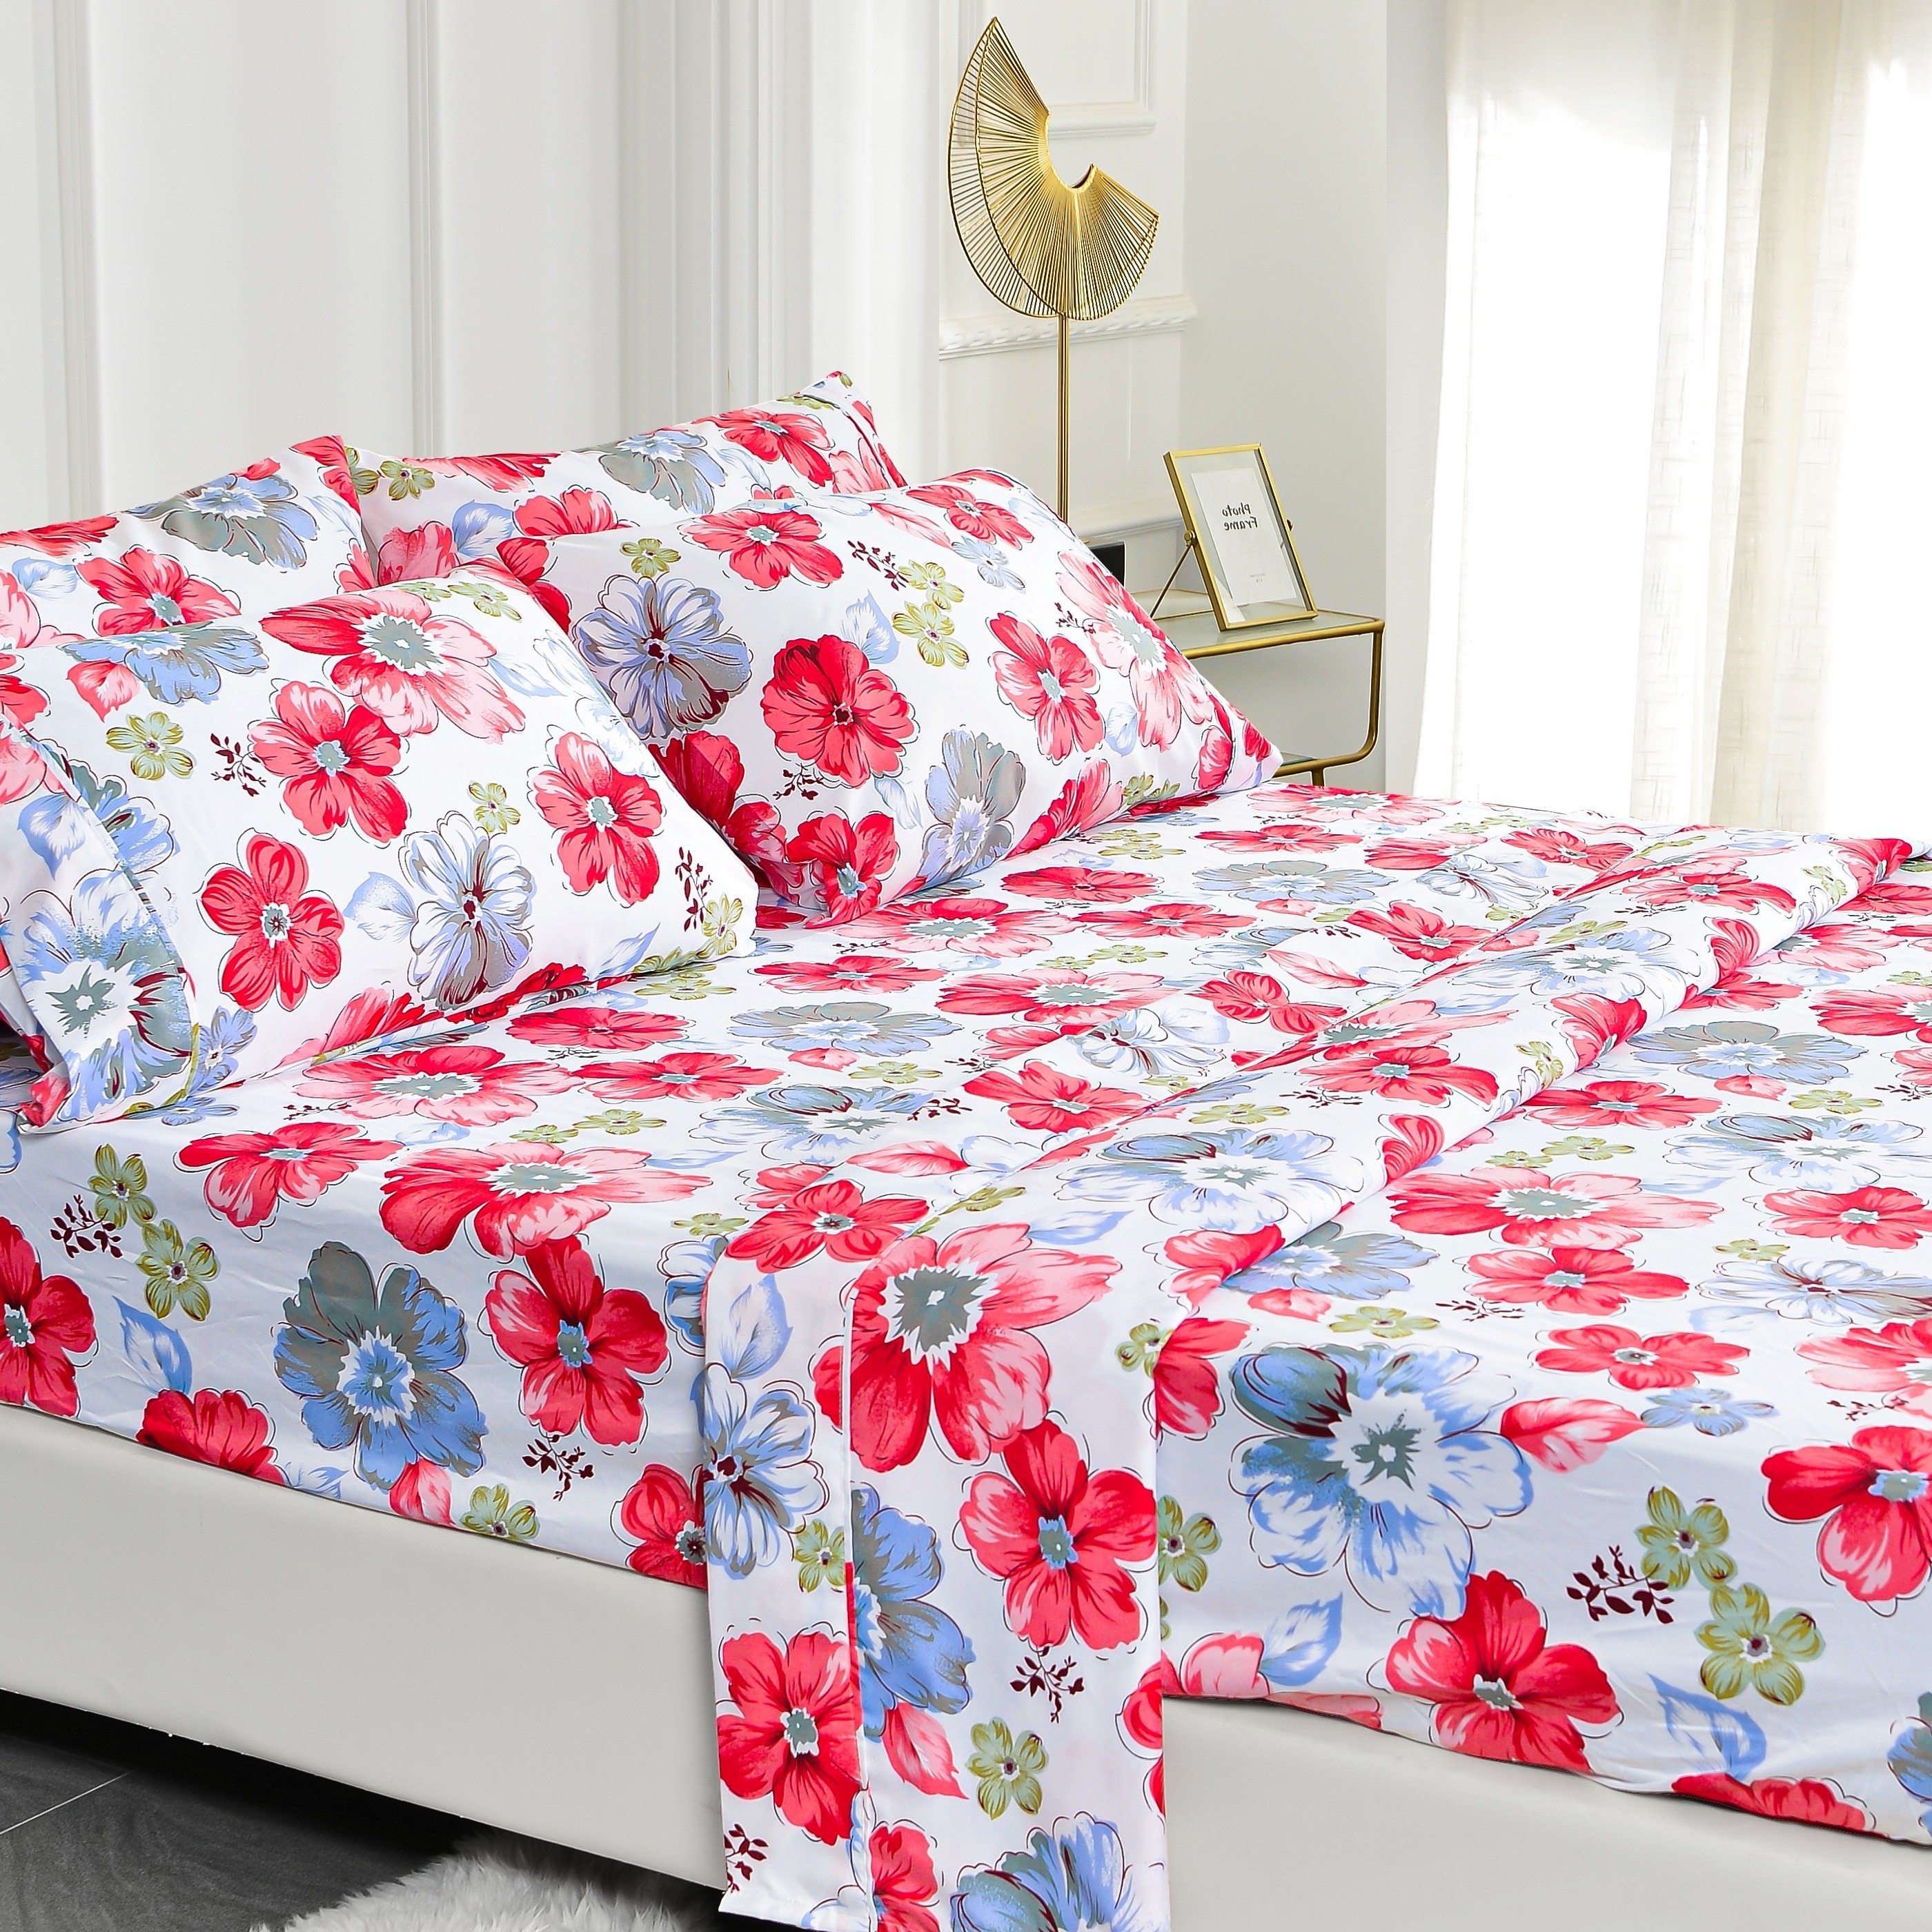 American Home Collection Ultra Soft 4-6 Piece Red Floral Printed Bed Sheet Set - Queen